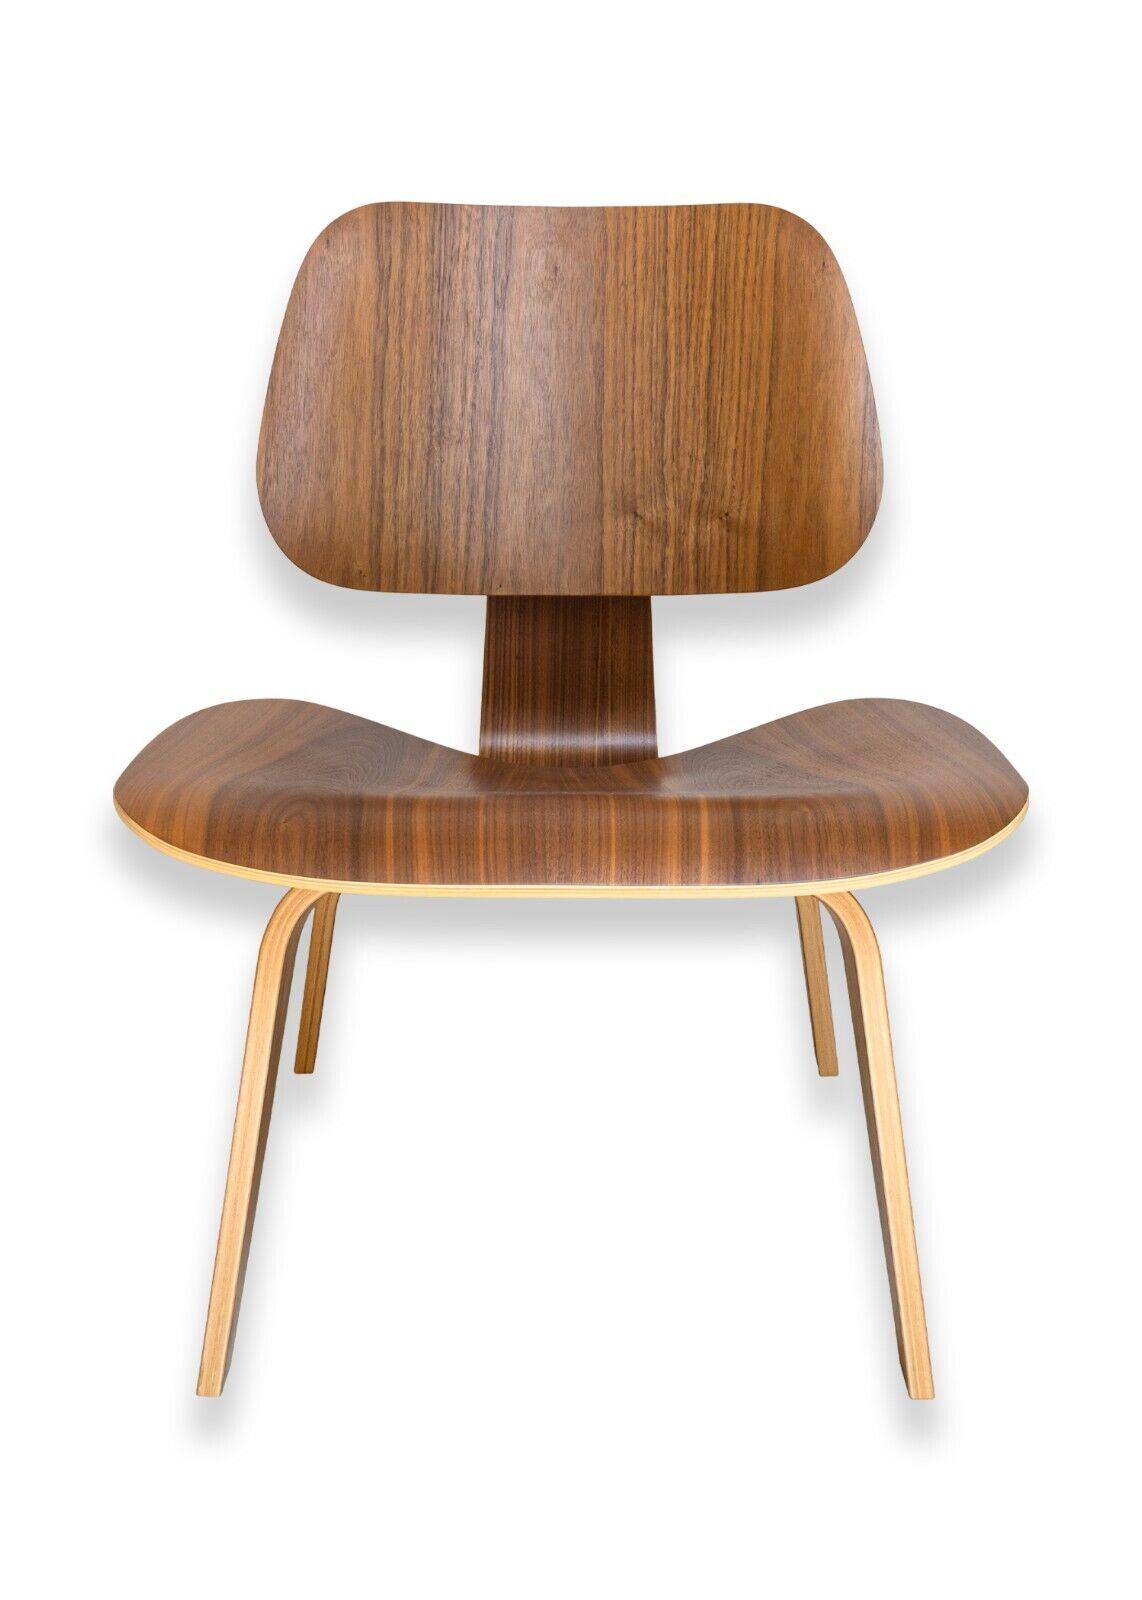 An Eames for Herman Miller bentwood contemporary modern LCW accent chair. This wonderful little accent chair expresses the great design and craftsmanship of Eames and Herman Miller. This chair features an all wood construction, gorgeous bentwood